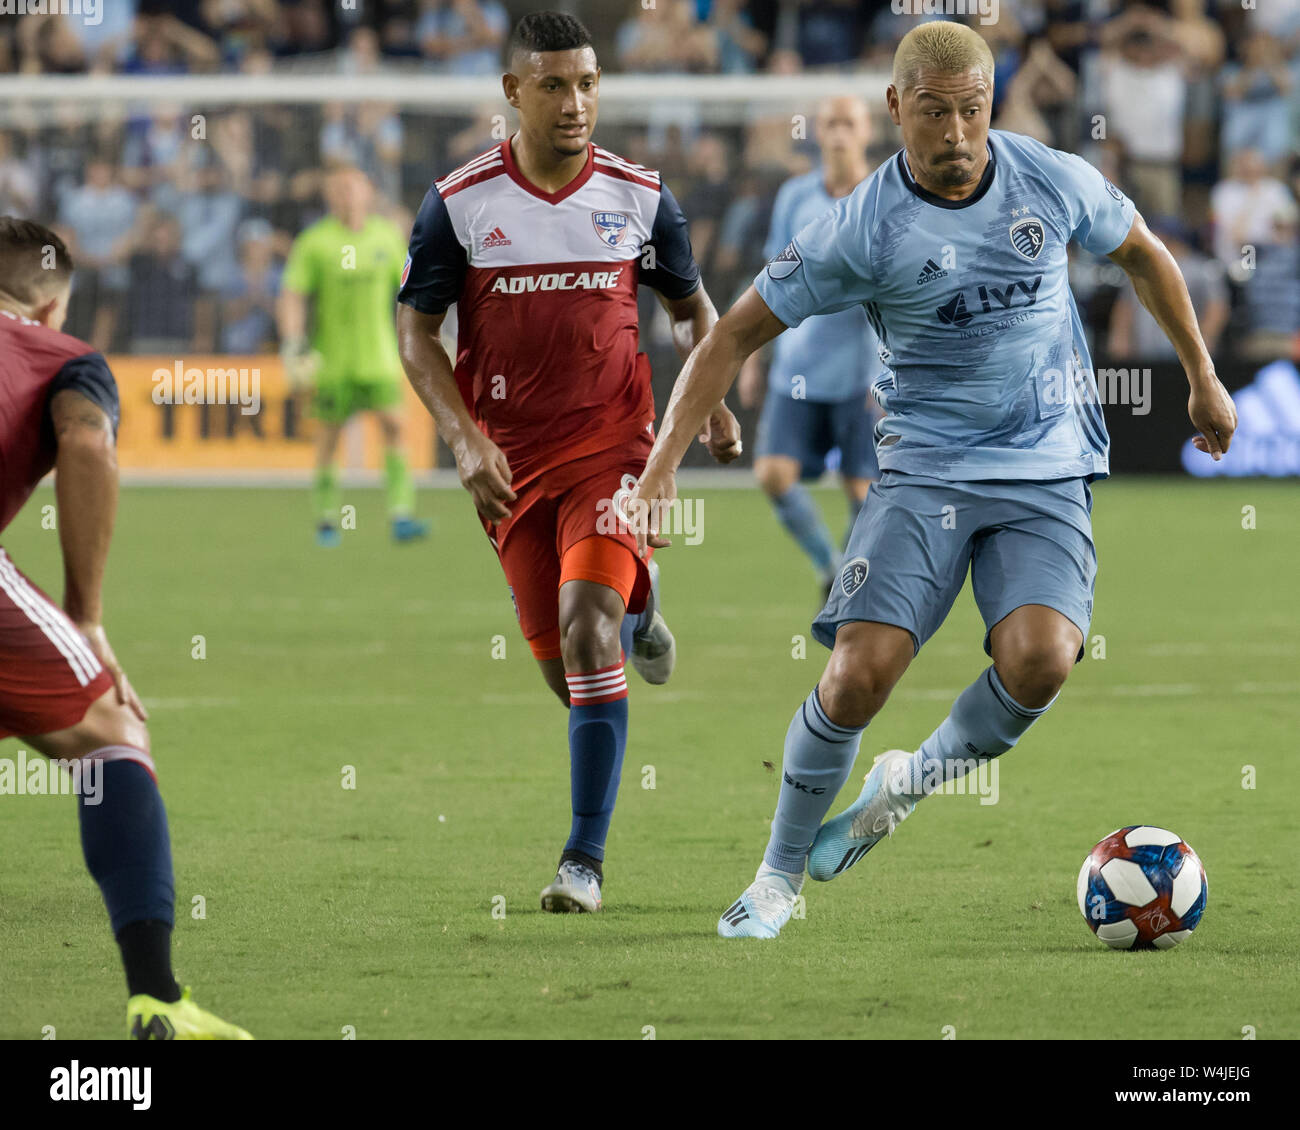 Kansas City, Kansas, USA. 20th July, 2019. Sporting KC midfielder Roger Espinoza #17 (r) makes a first-time game appearance after a 3-month hiatus from a knee injury. At left is FC Dallas midfielder Bryan Acosta #8. Credit: Serena S.Y. Hsu/ZUMA Wire/Alamy Live News Stock Photo